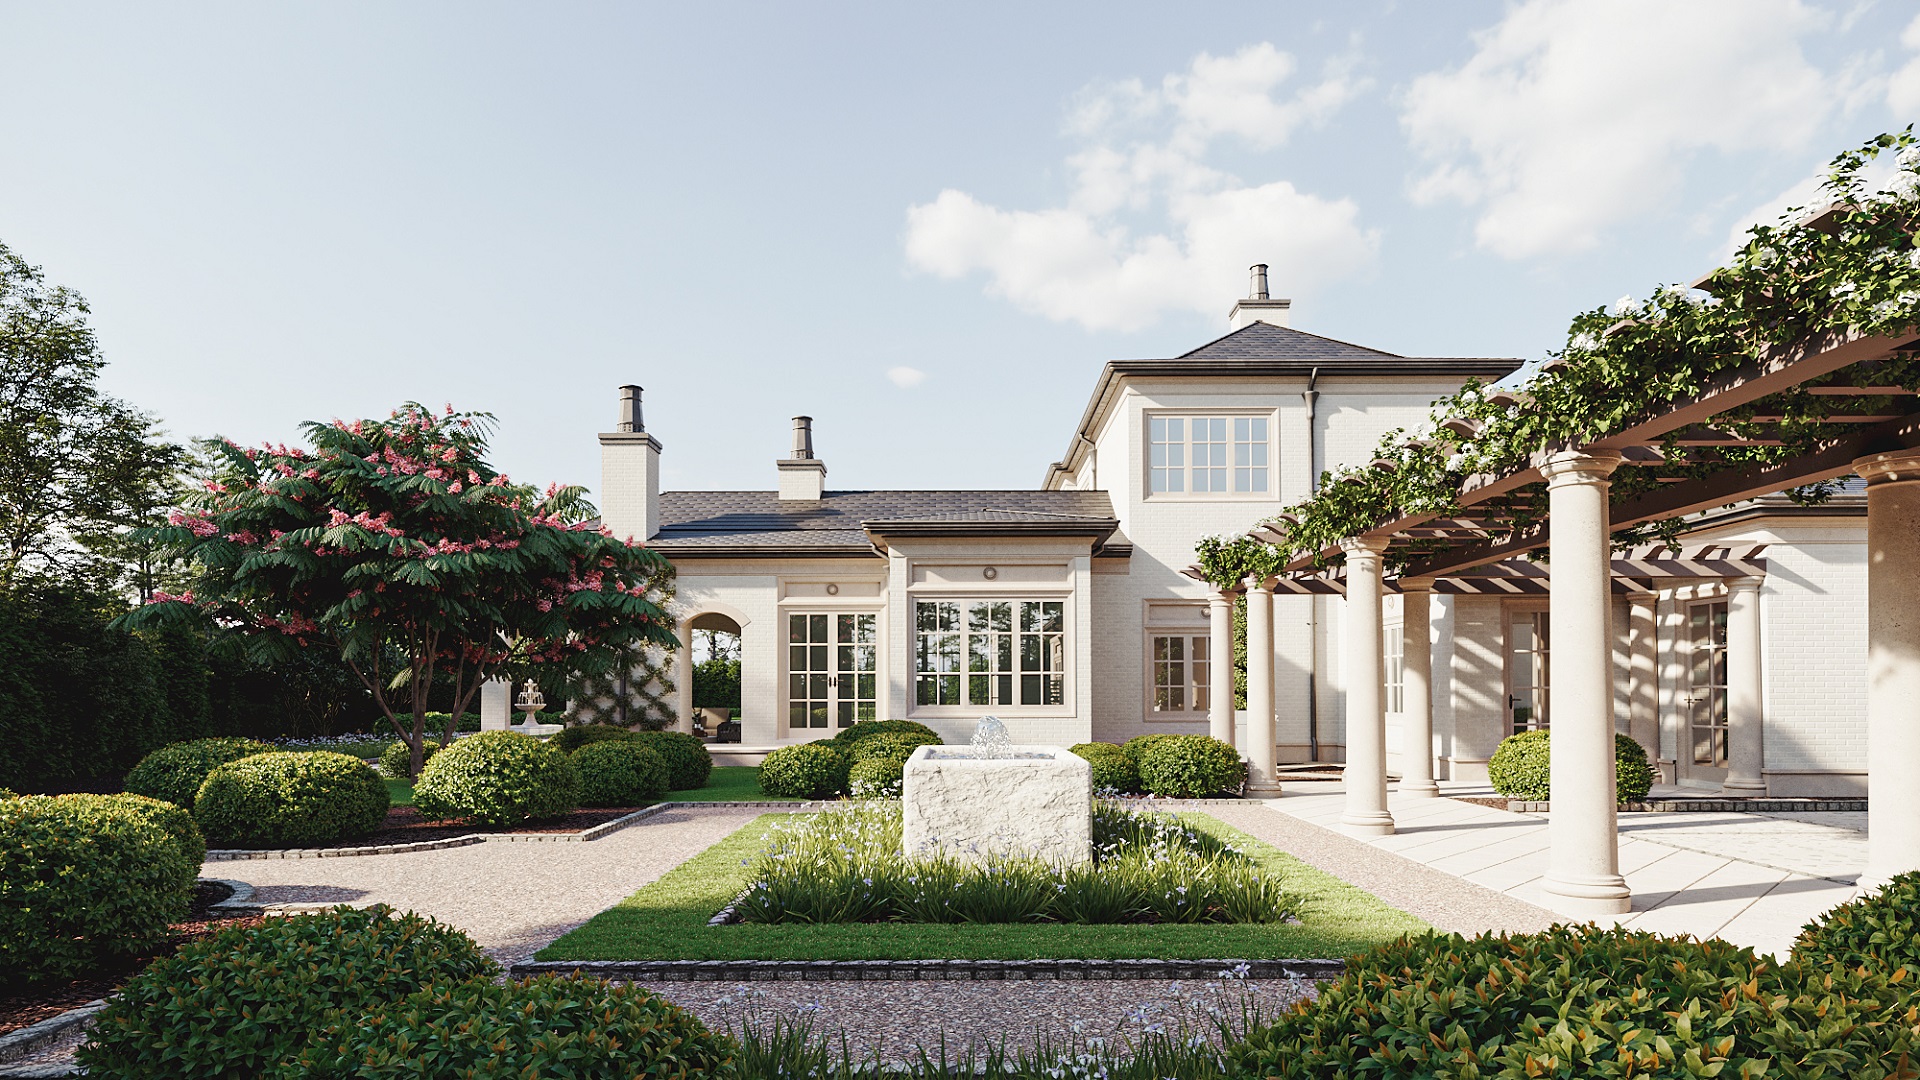 Exterior CG Visualization of a Classic Residence